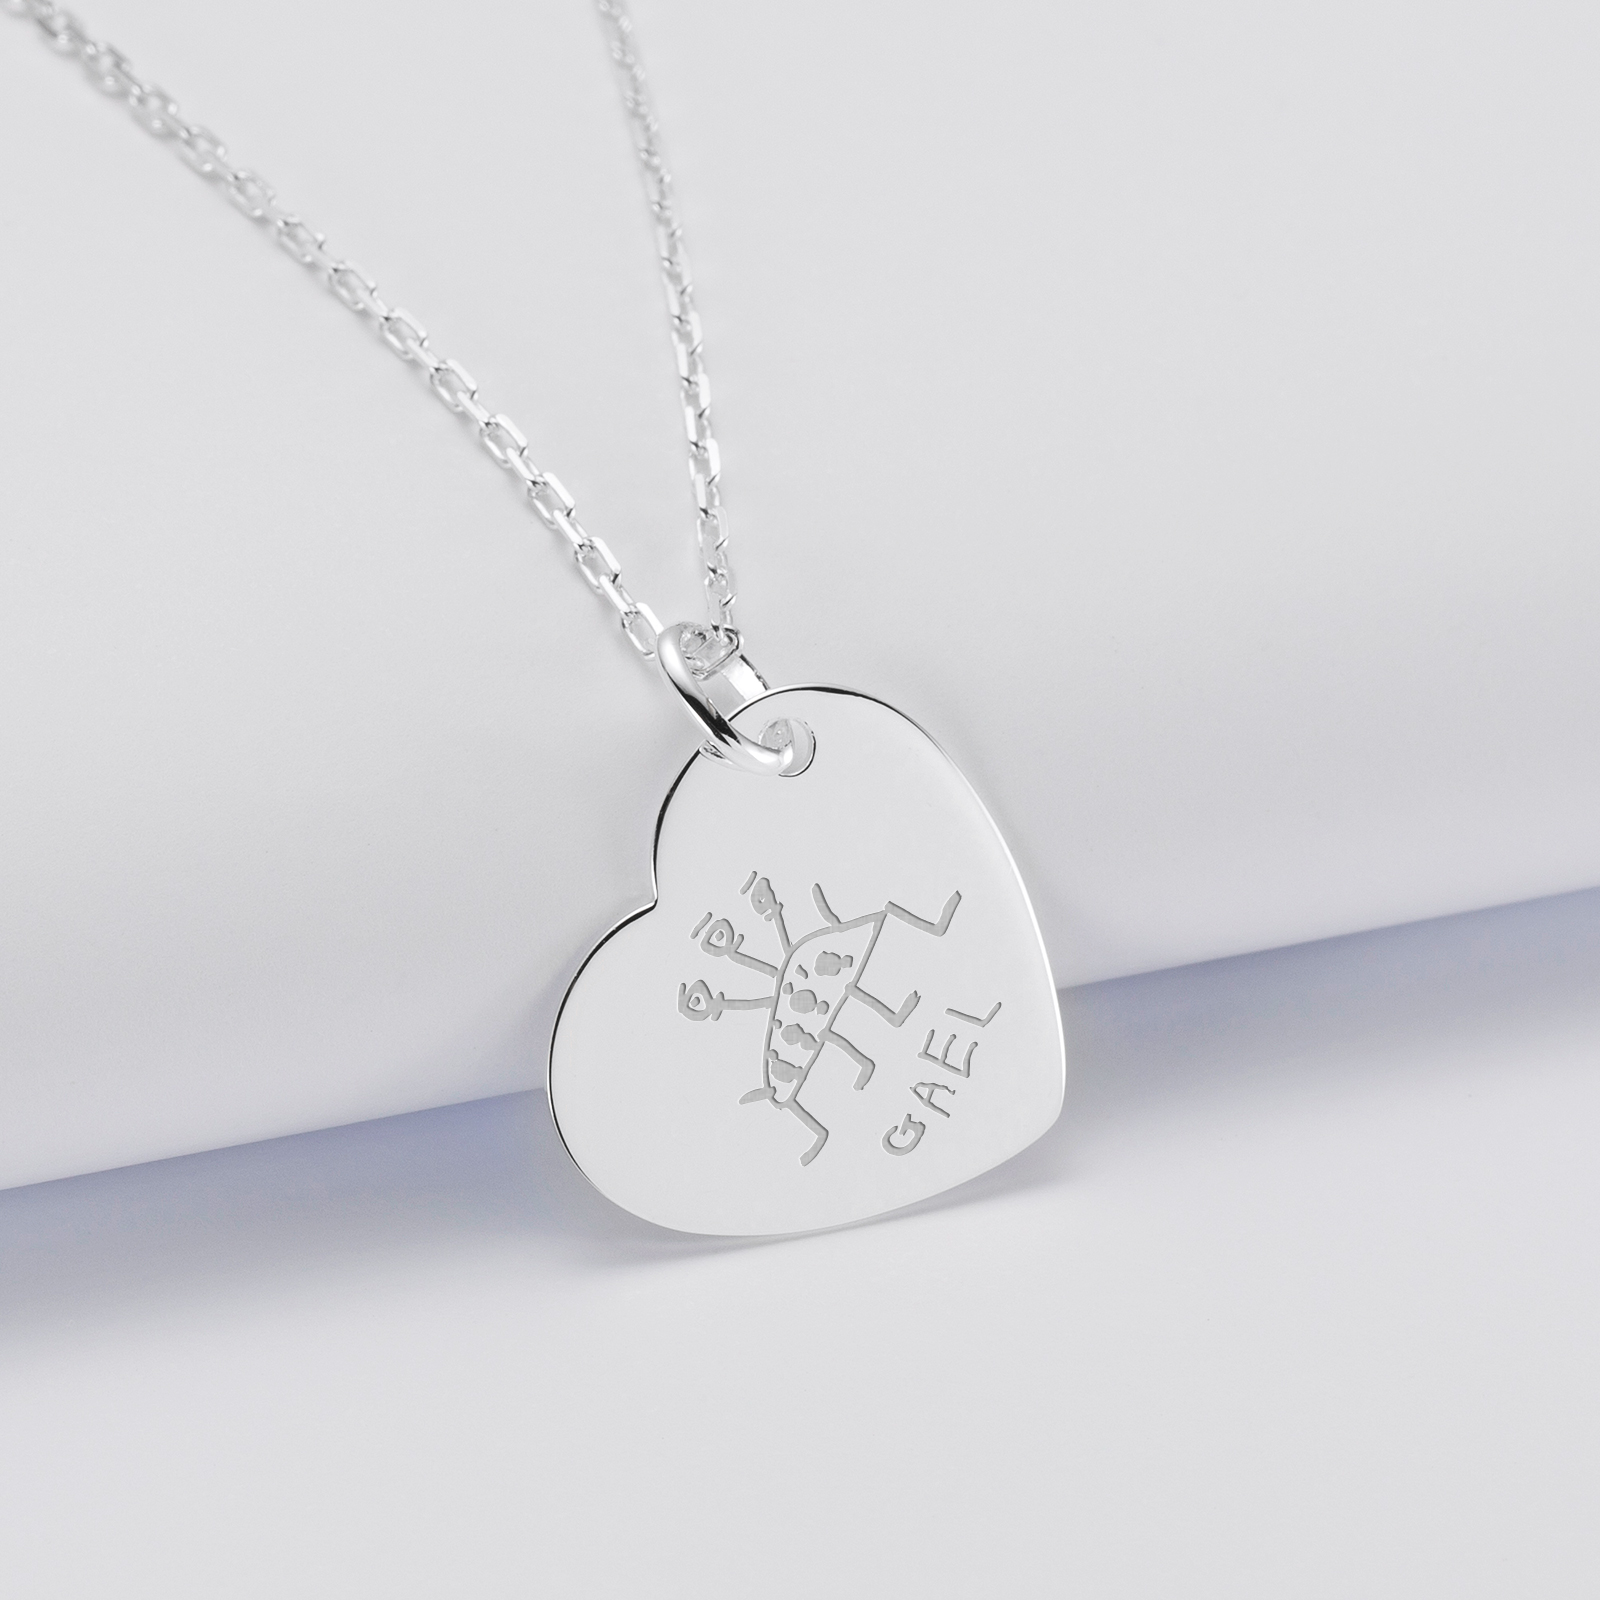 Personalised engraved silver heart medallion pendant 19x21mm - sketch